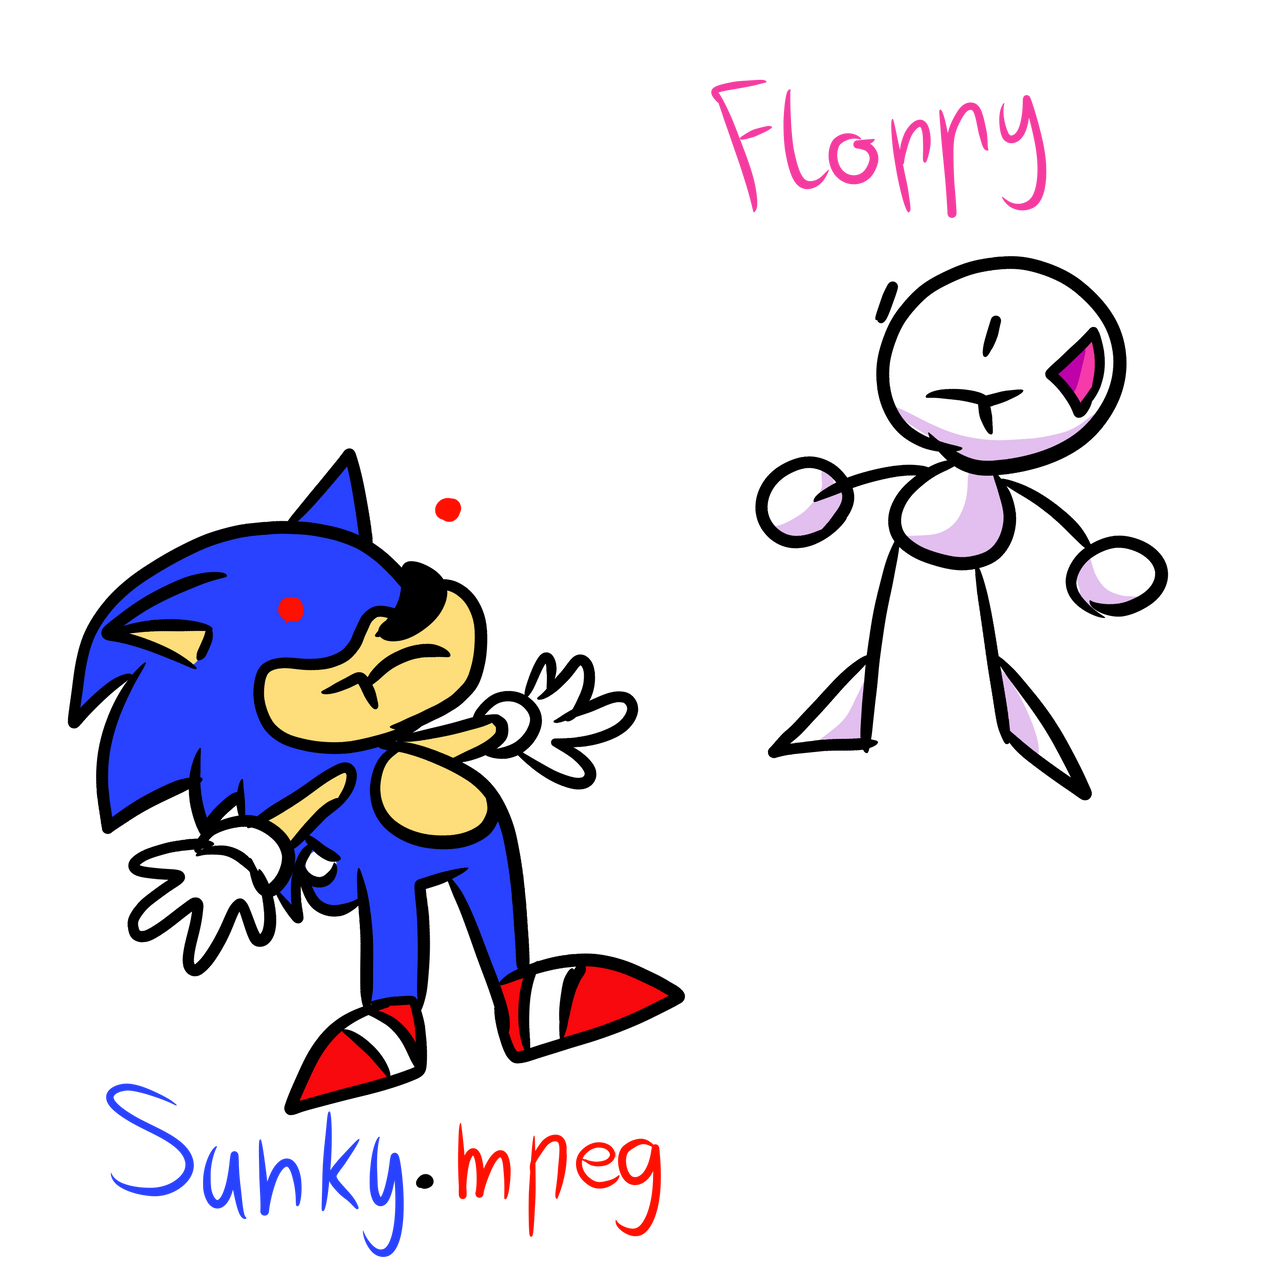 Sunky And Sunky.MPEG Crossover 2 worlds by Retro-game on DeviantArt